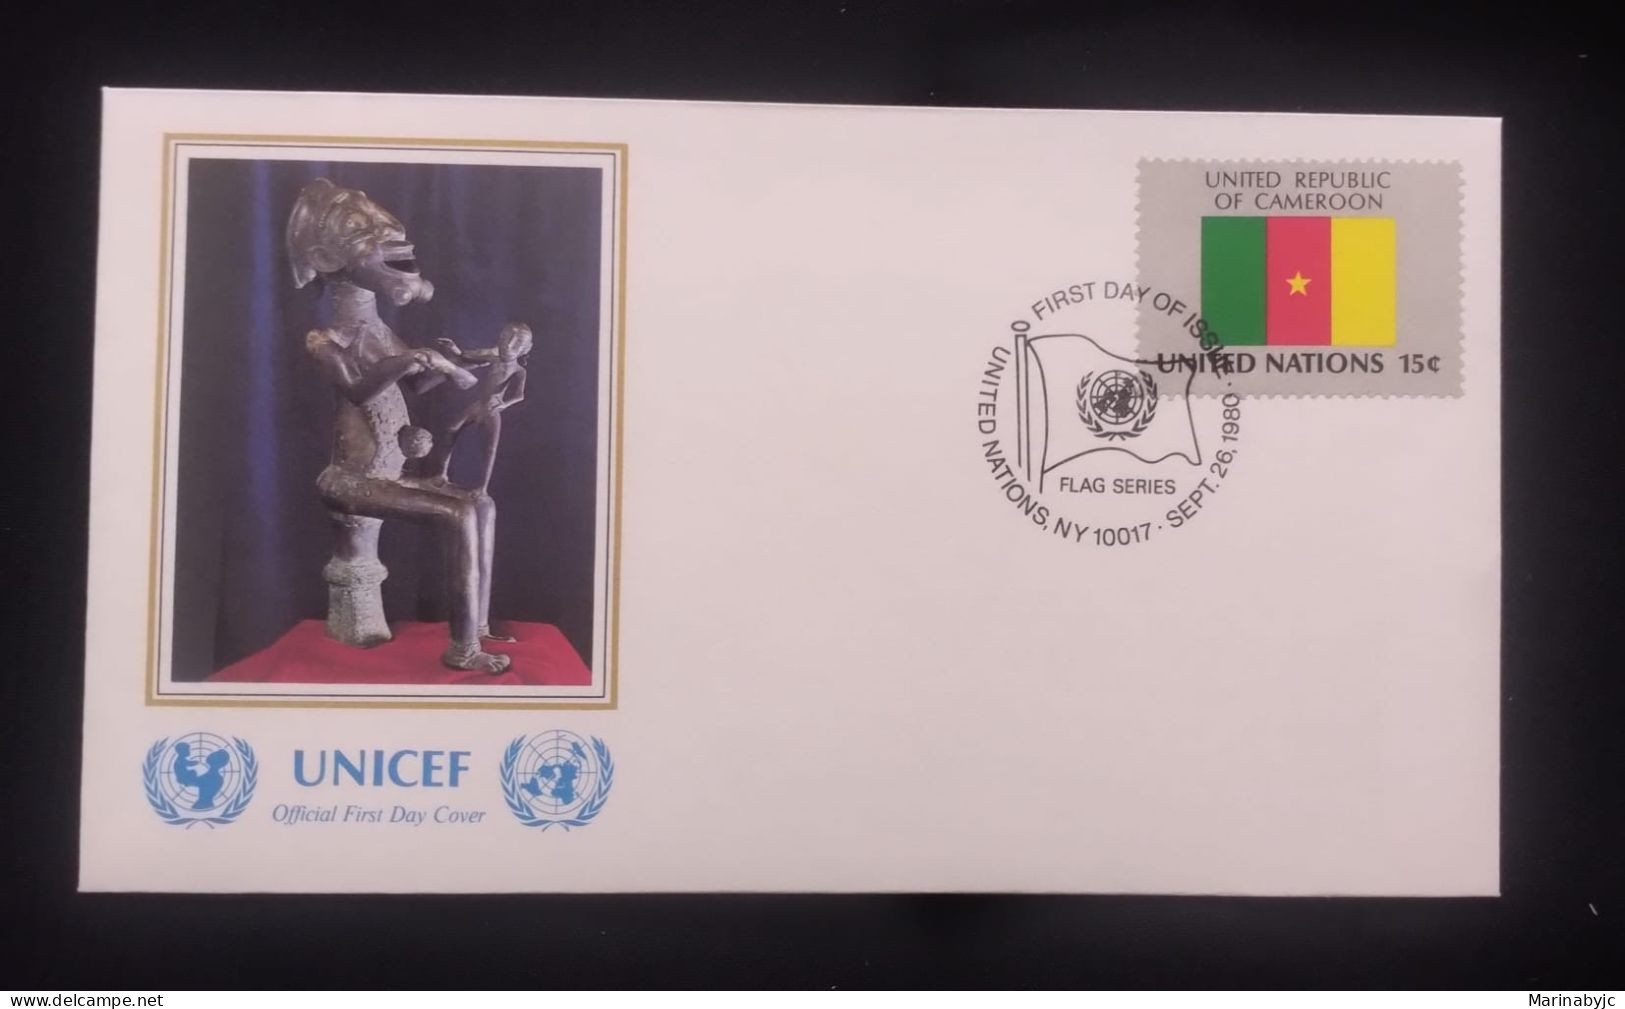 EL)1980 UNITED NATIONS, NATIONAL FLAG OF THE MEMBER COUNTRIES, CAMEROON, UNICEF, ARCHEOLOGY, FDC - Ongebruikt